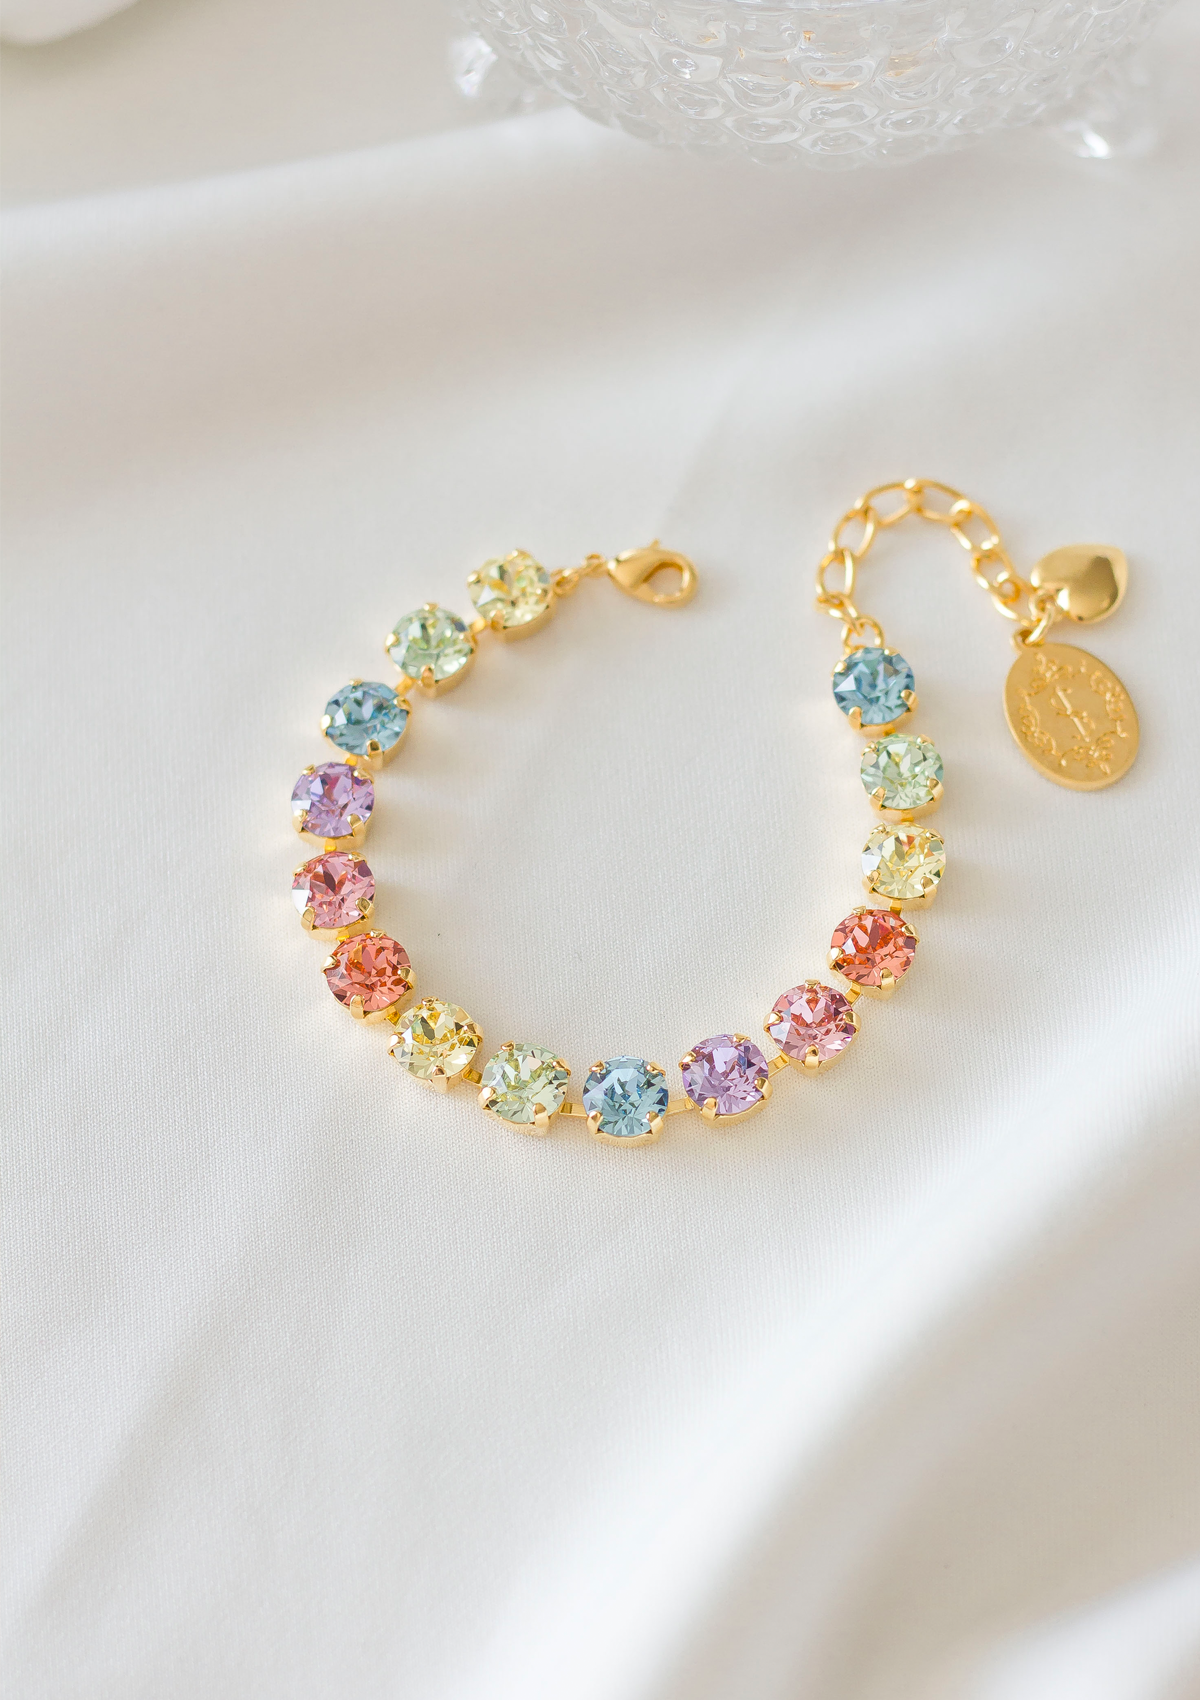 Sparkling Stars Bracelet, jewelry designed and made by Sarah Gauci in Malta. 8mm Pastel Crystals. 16K gold plated, Rose Gold or silver plated.